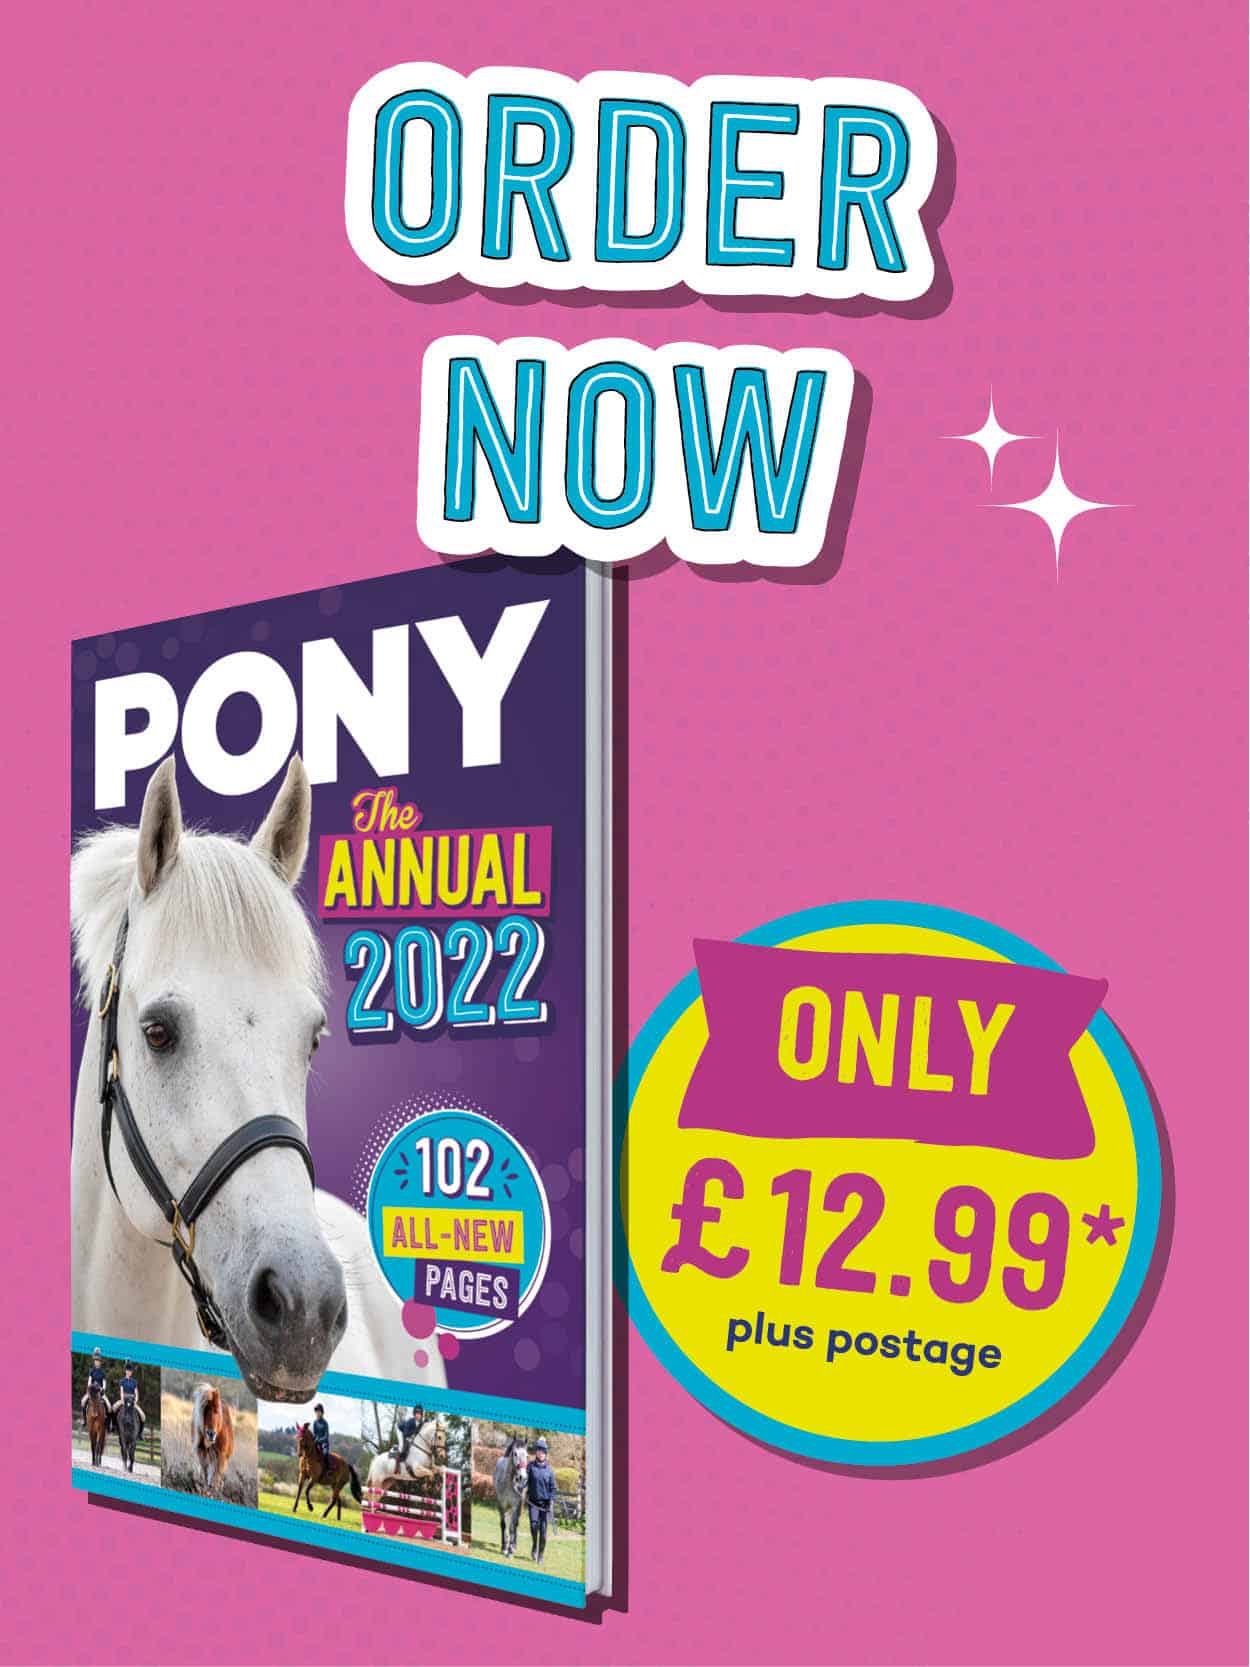 PONY the Annual 2022